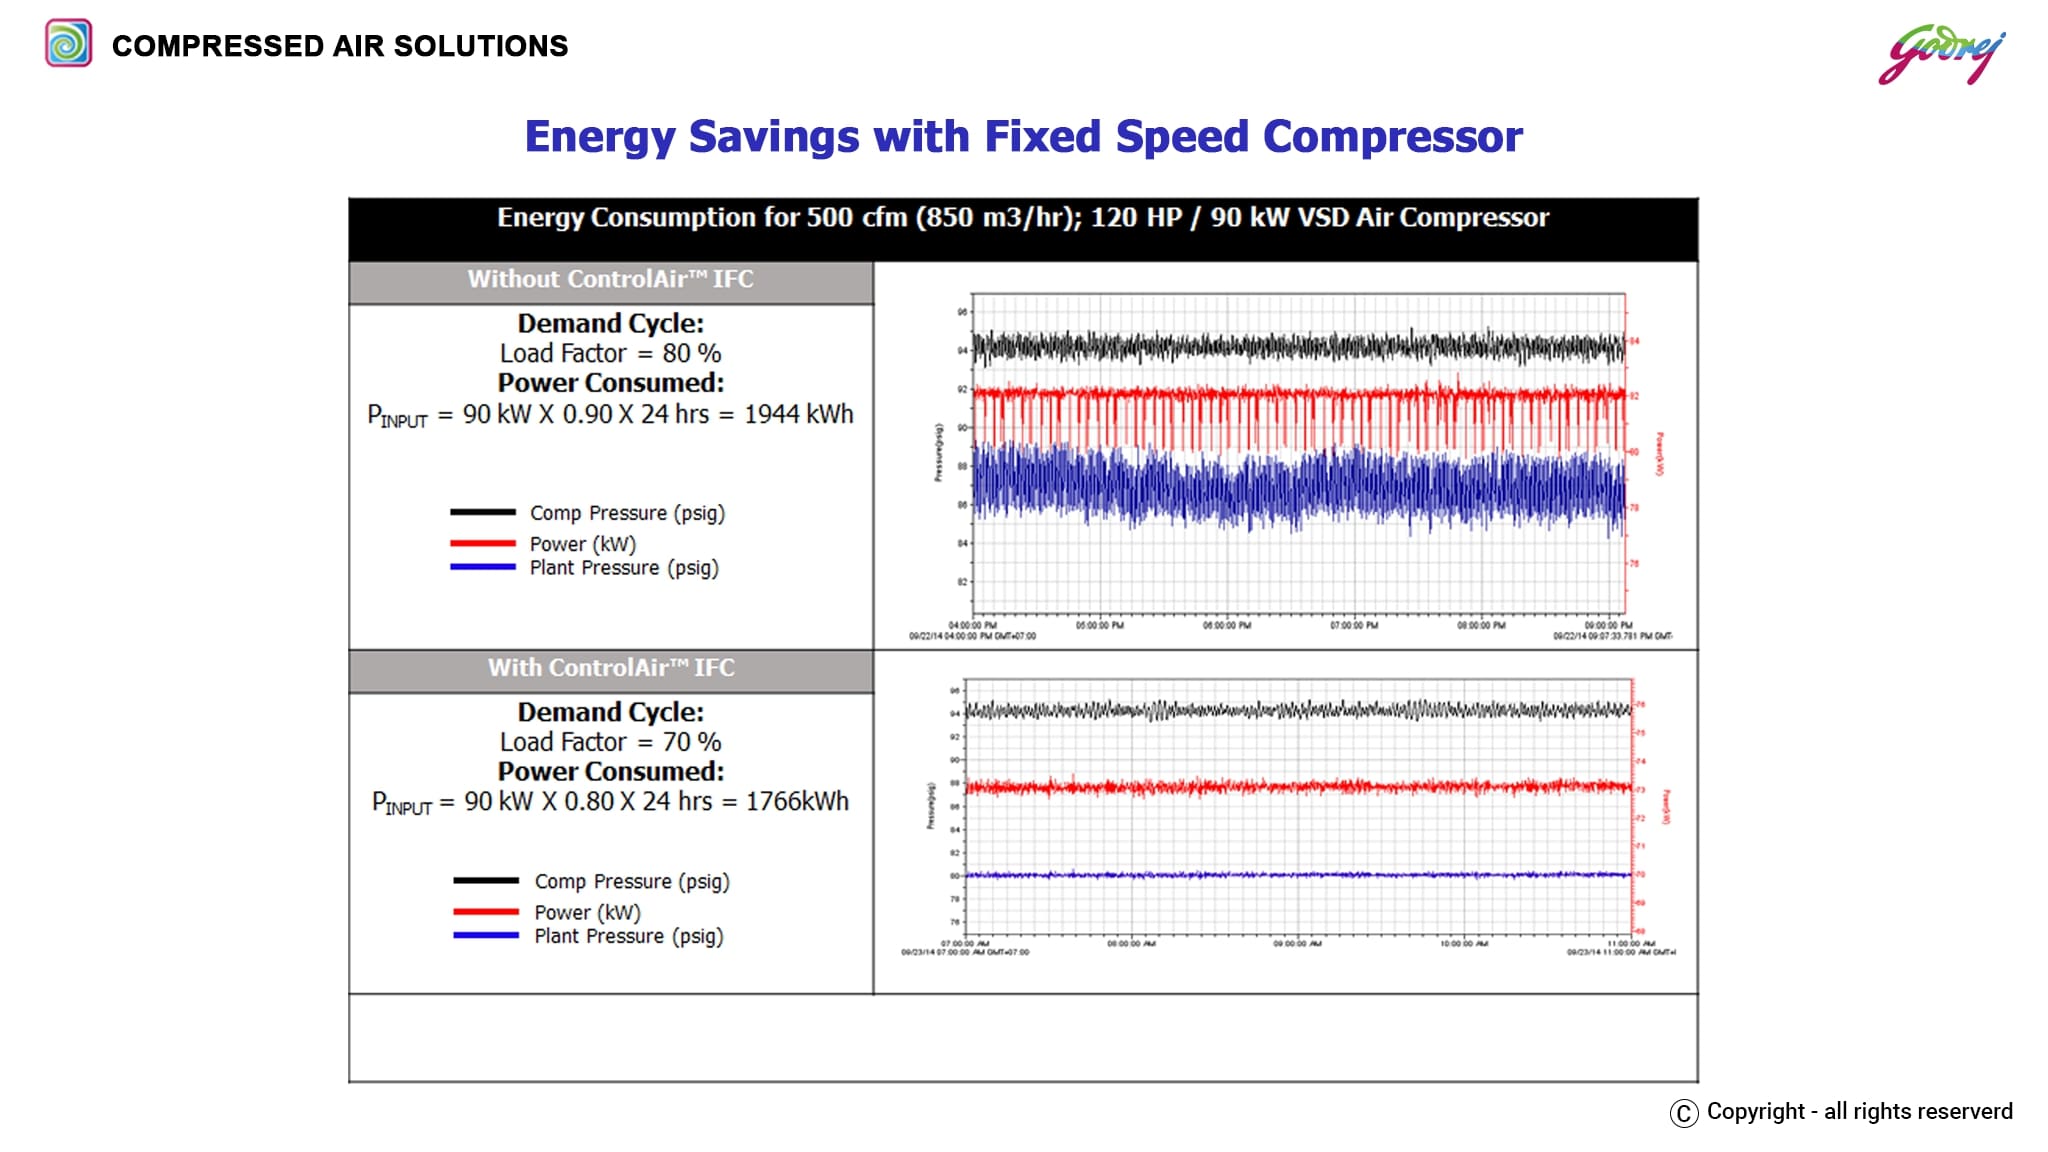 Energy Savings with Variable Speed Compressor-ENERGY SAVING SOLUTIONS IN COMPRESSED AIR NETWORK (GODREJ)